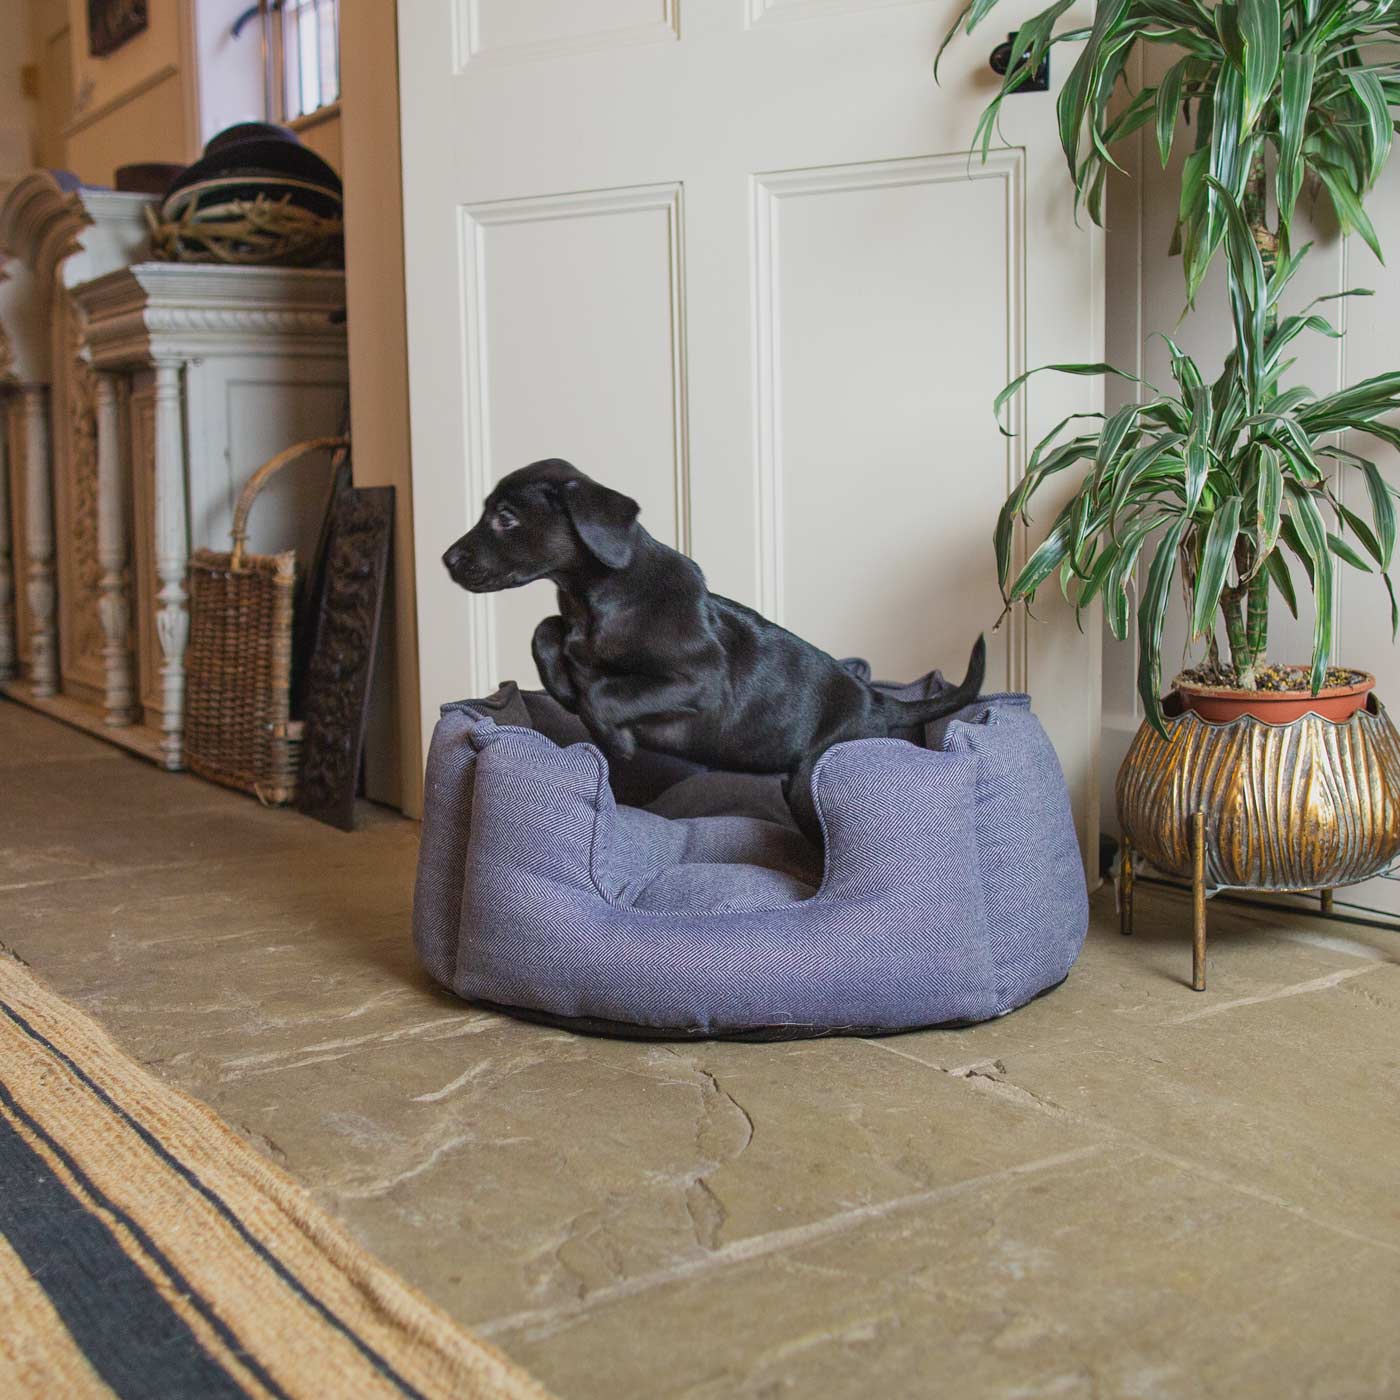 [color:oxford herringbone] Discover Our Luxurious High Wall Bed For Dogs, Featuring inner pillow with plush teddy fleece on one side To Craft The Perfect Dogs Bed In Stunning Oxford Herringbone Tweed! Available To Personalize Now at Lords & Labradors US